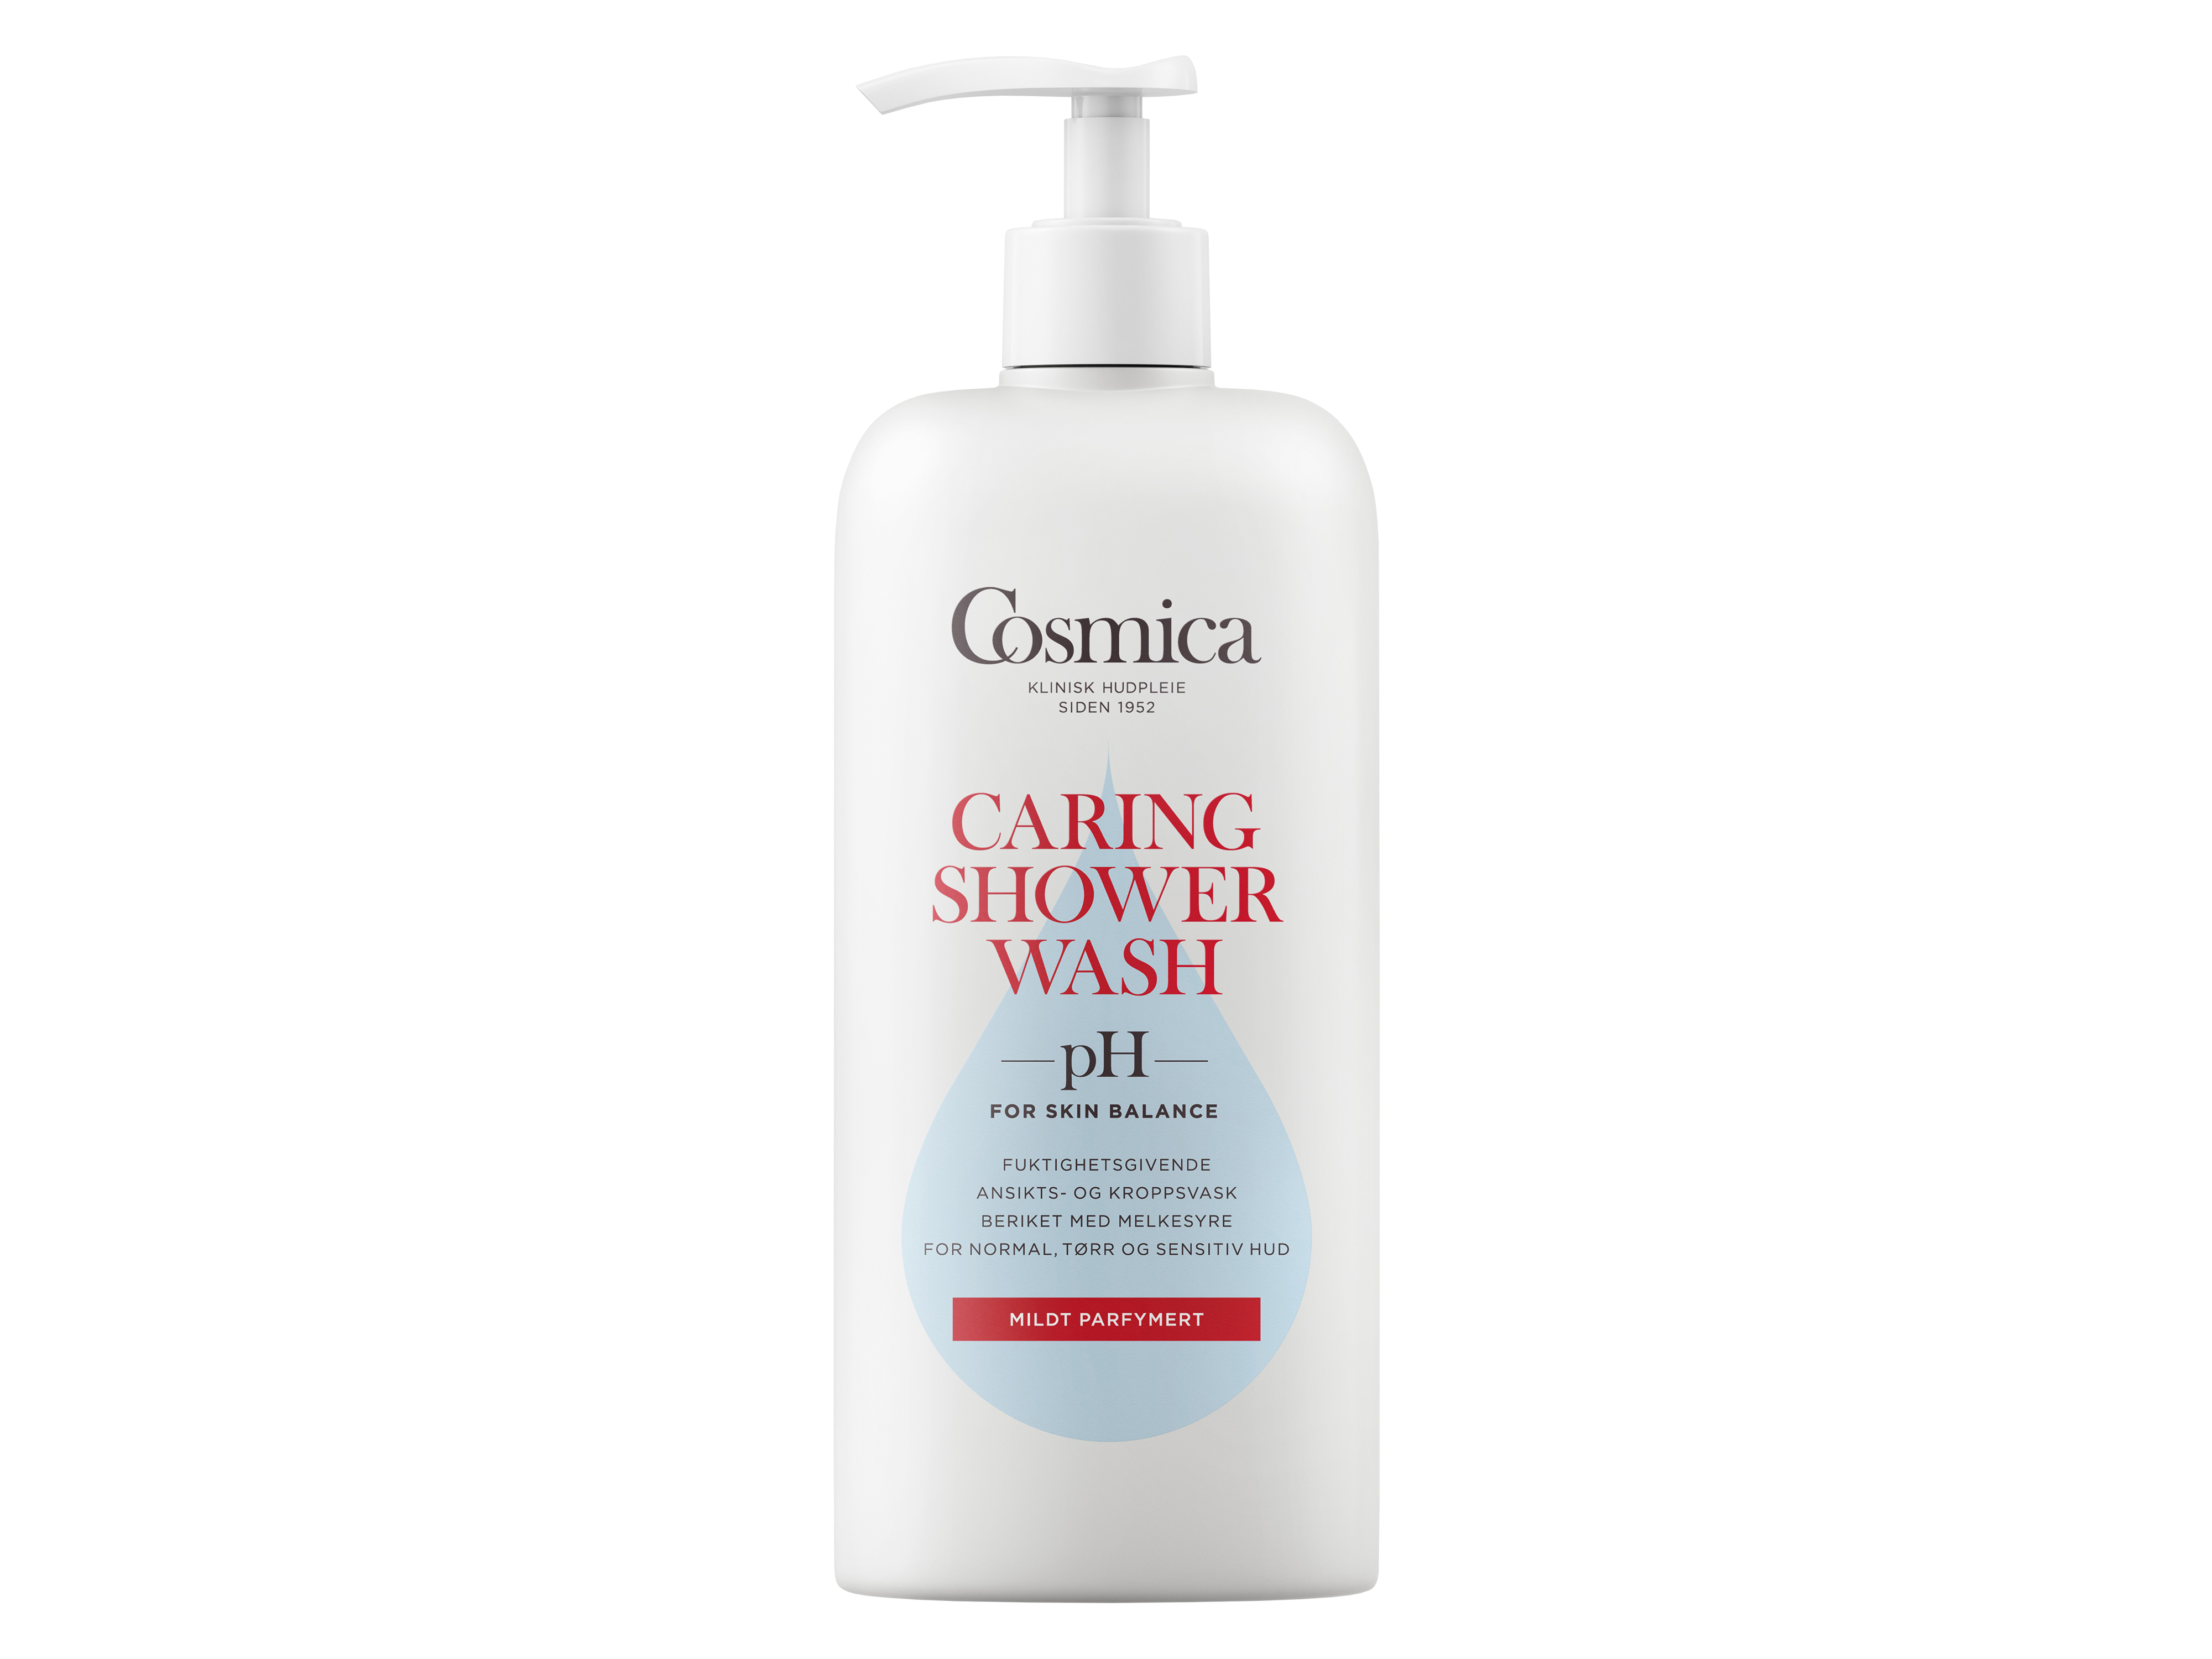 Cosmica Caring Shower Wash med parfyme, 400 ml